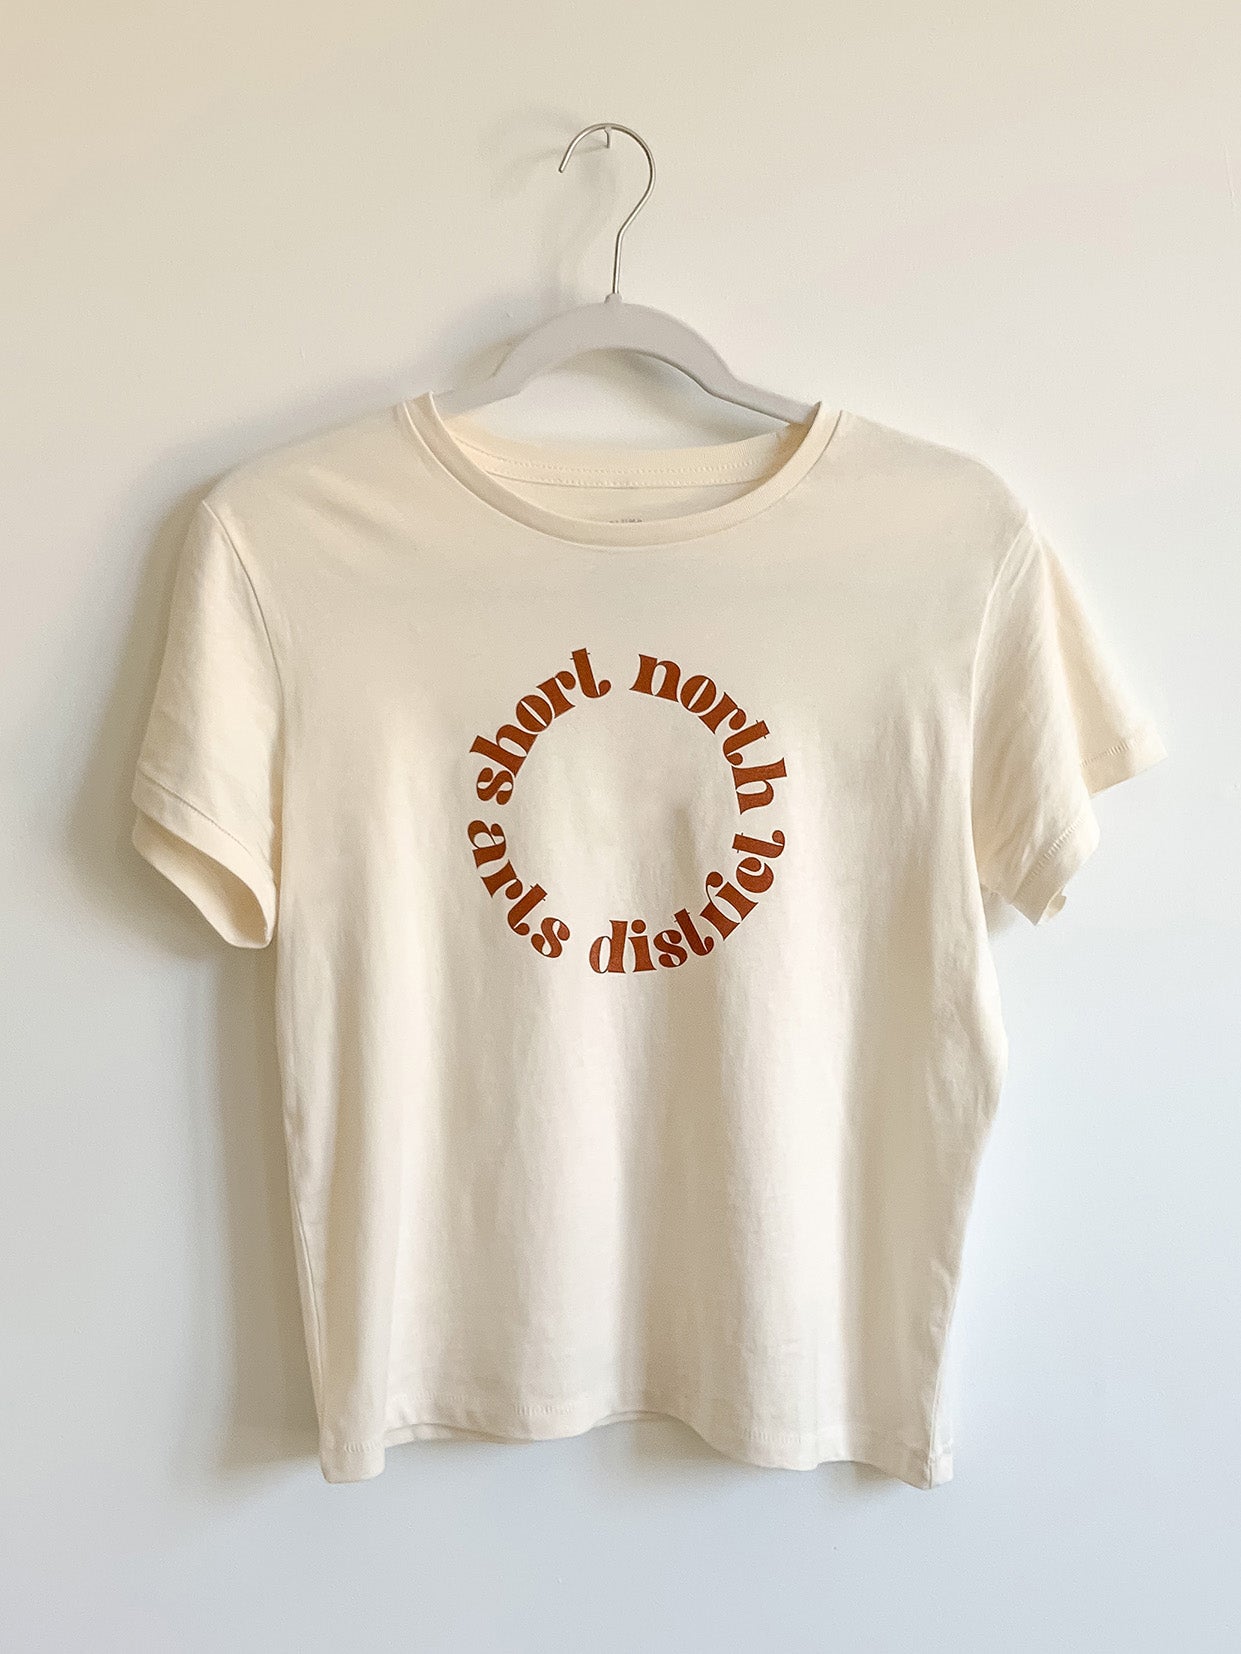 High-Waisted cream tee with Short North Arts District Columbus, Ohio circular graphic on front